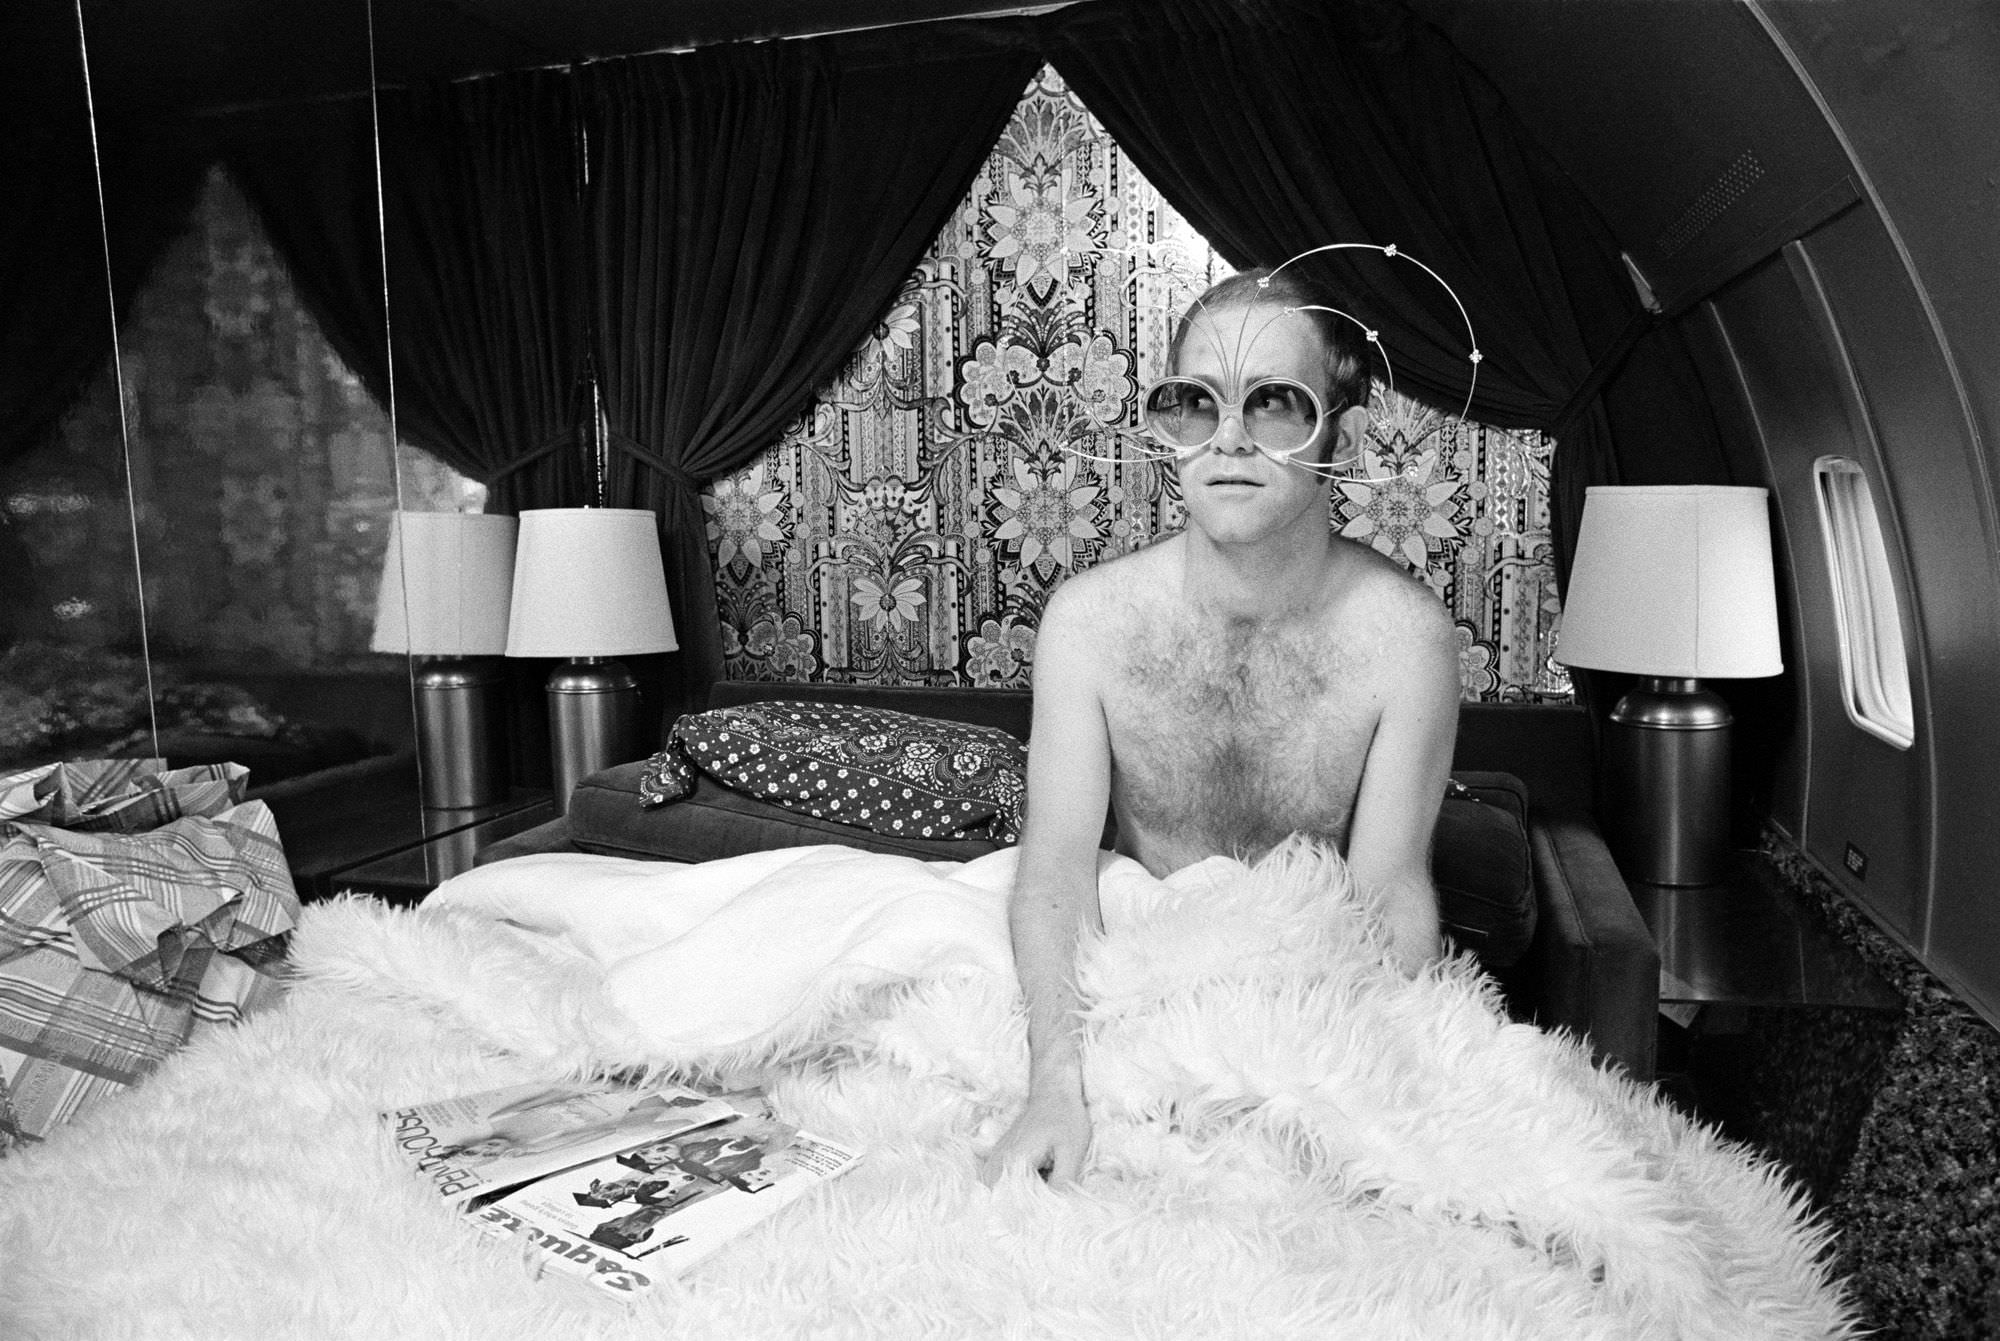 Elton John photographed by Terry O’Neill in bed on a private plane, 1975.